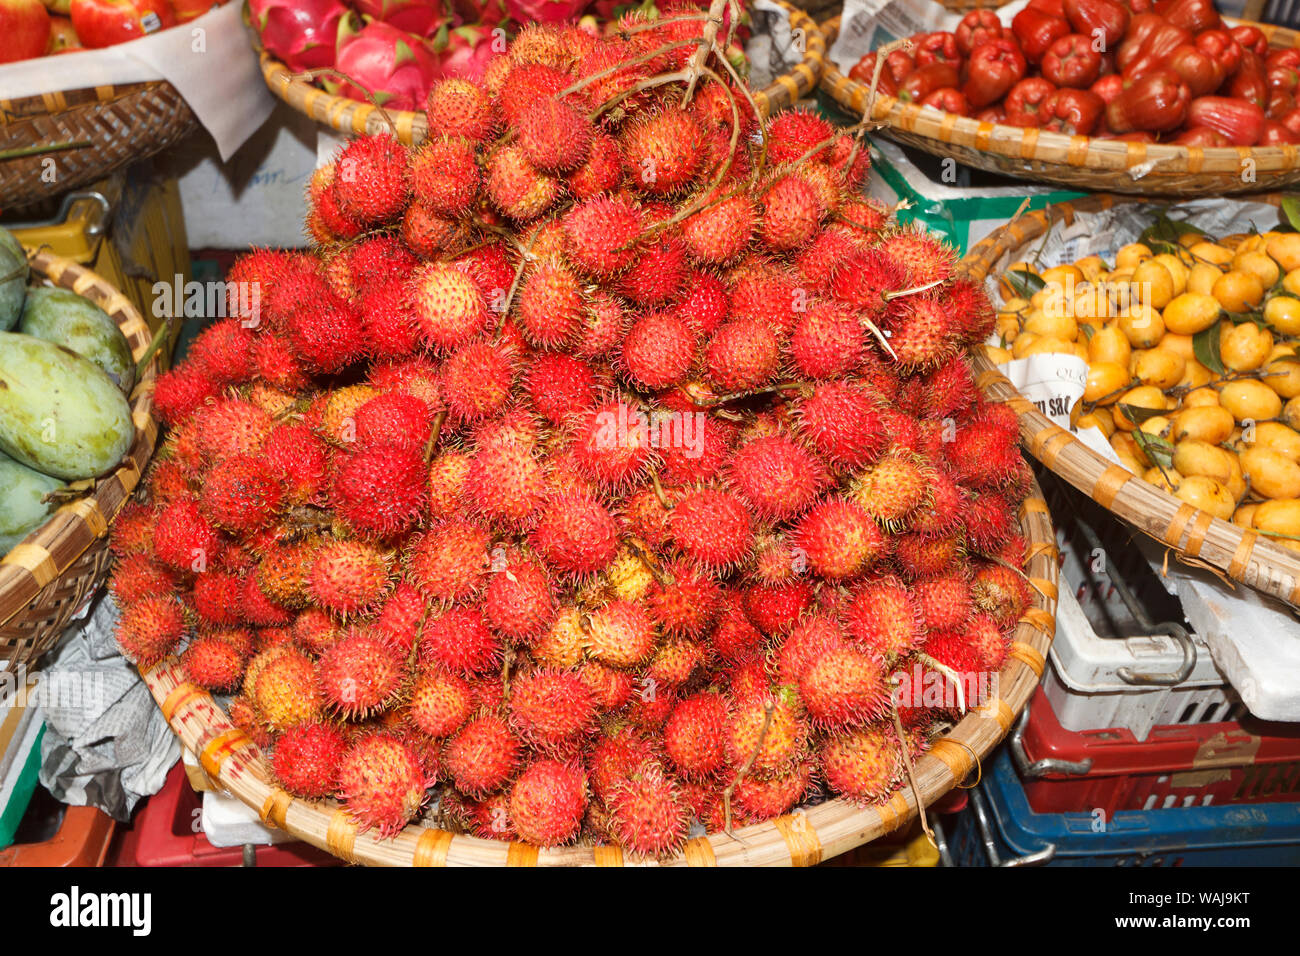 Hanoi, Vietnam. Rambutan, a lychee like fruit for sale in Hom Market in the 36 Streets area, part of the historic old city. Stock Photo